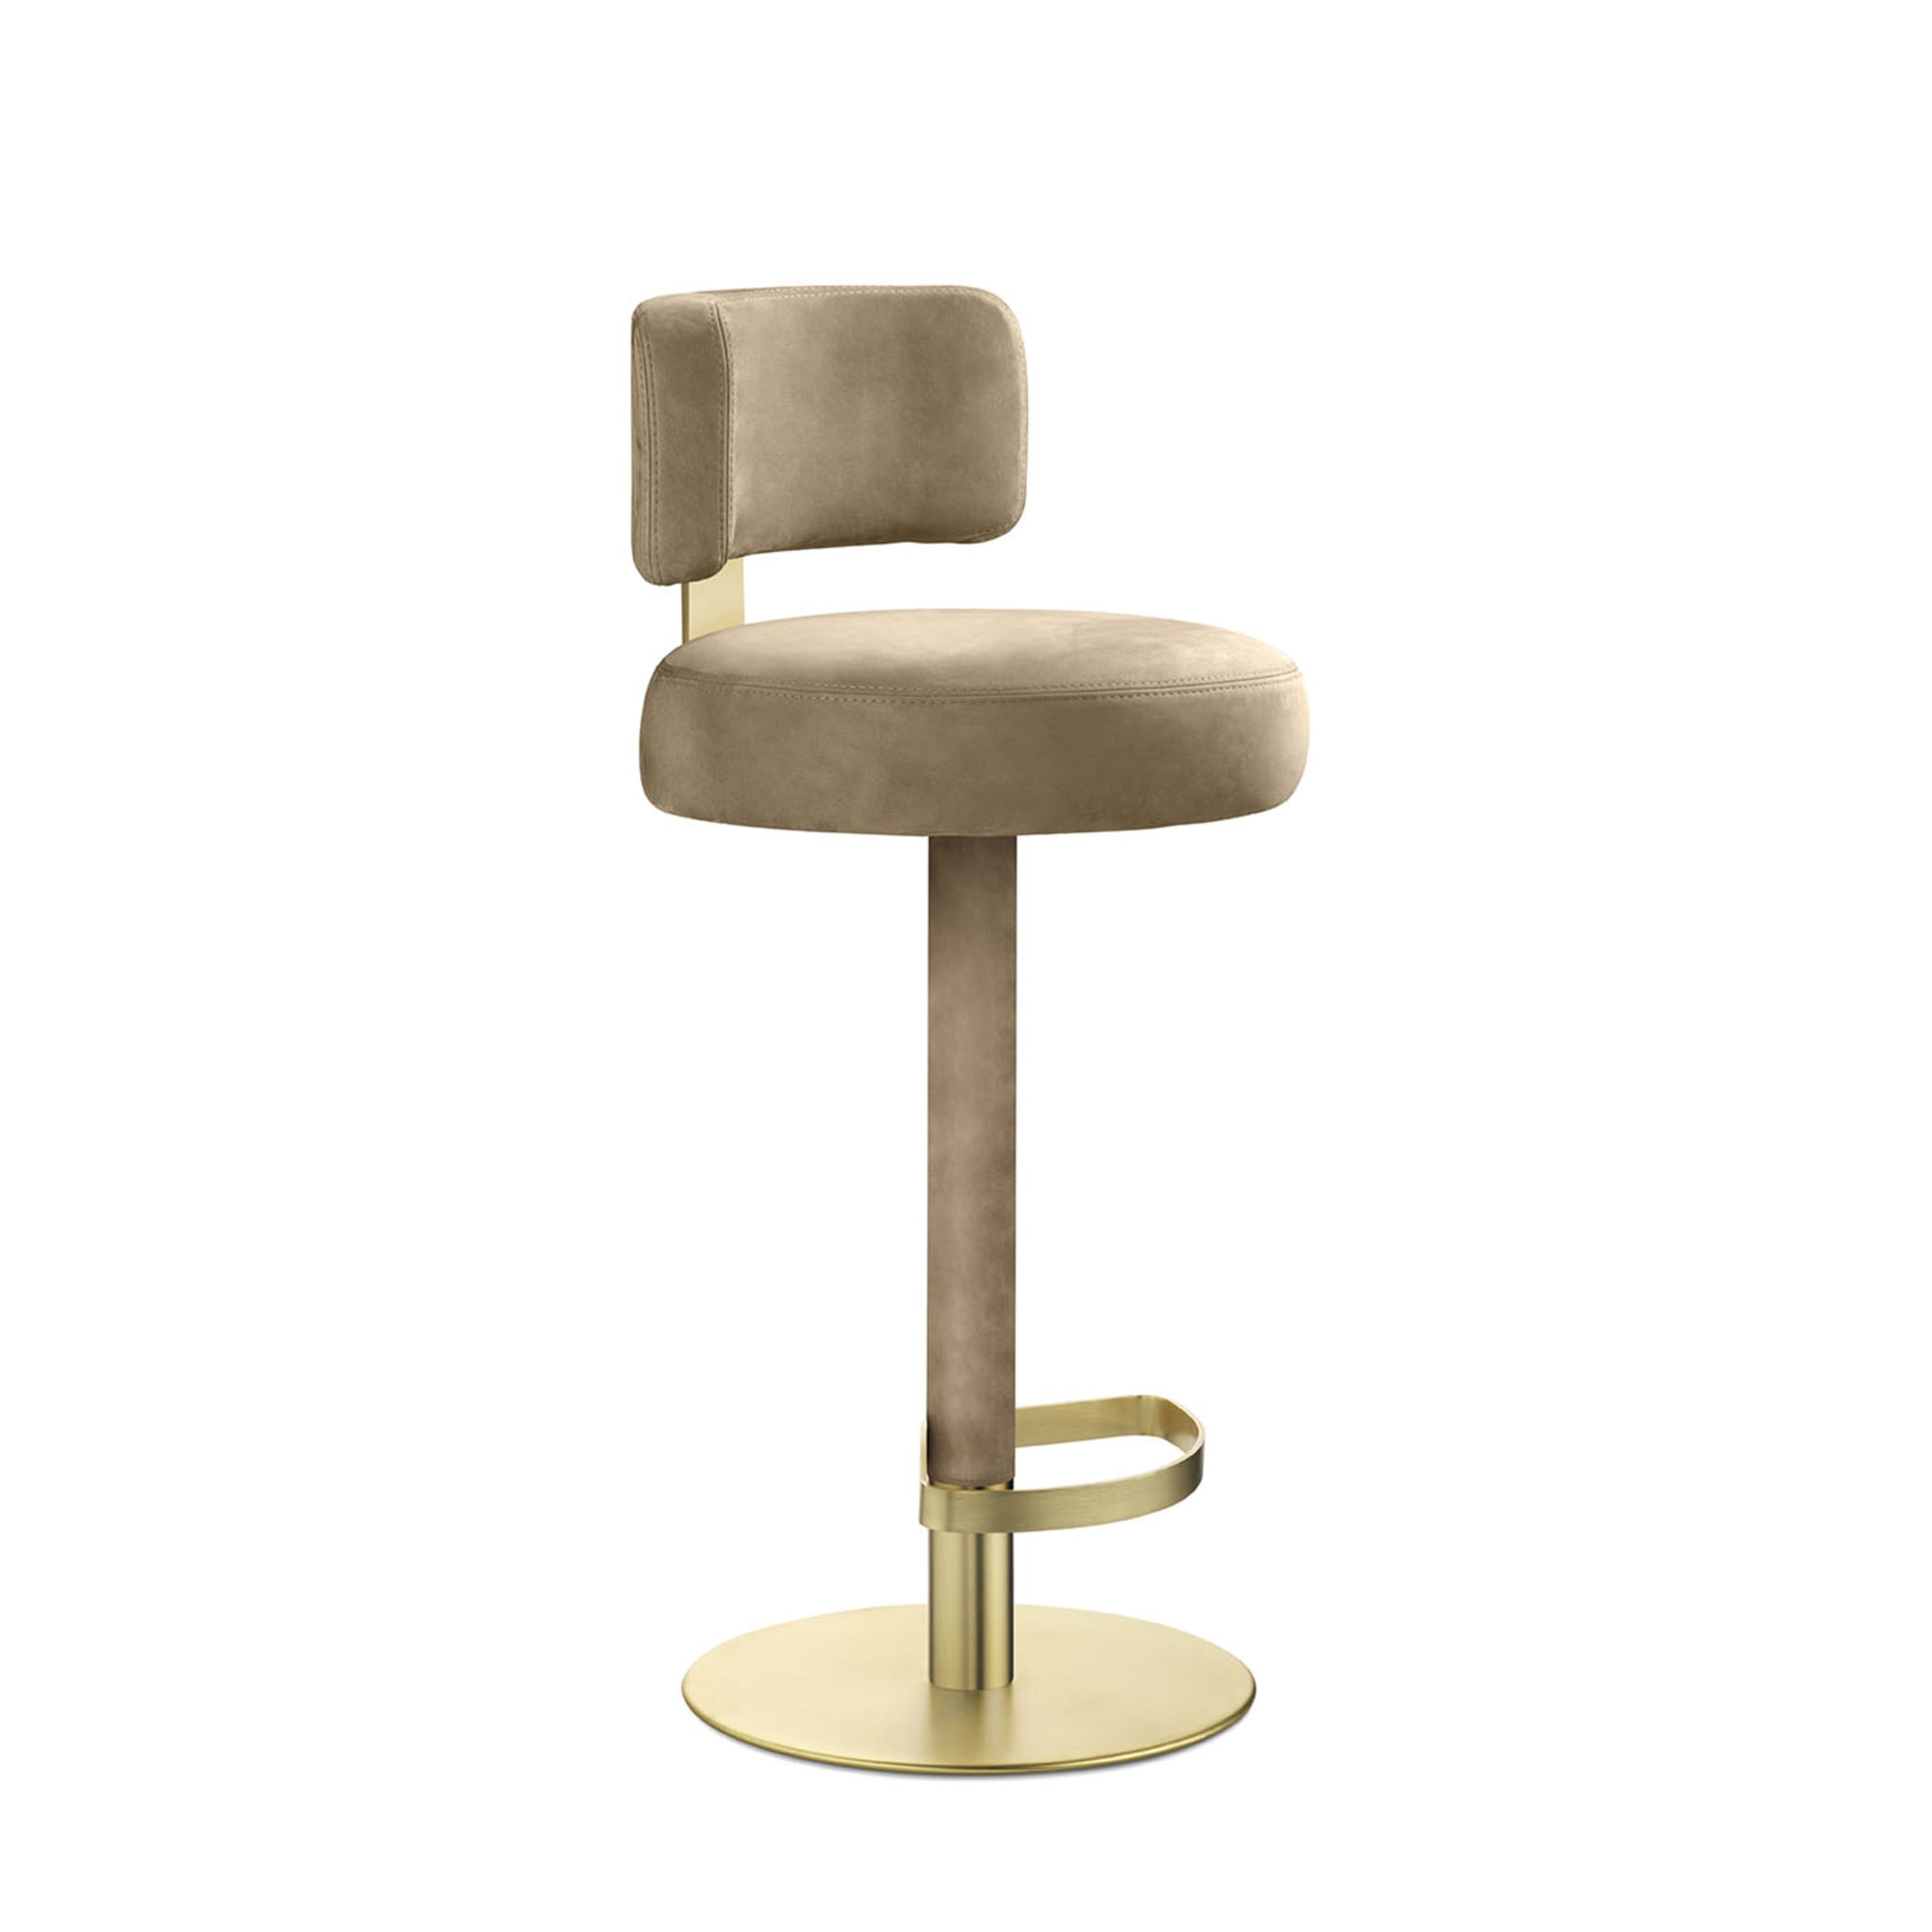 Alfred fixed Gold Bar Stool - Alternative view 3